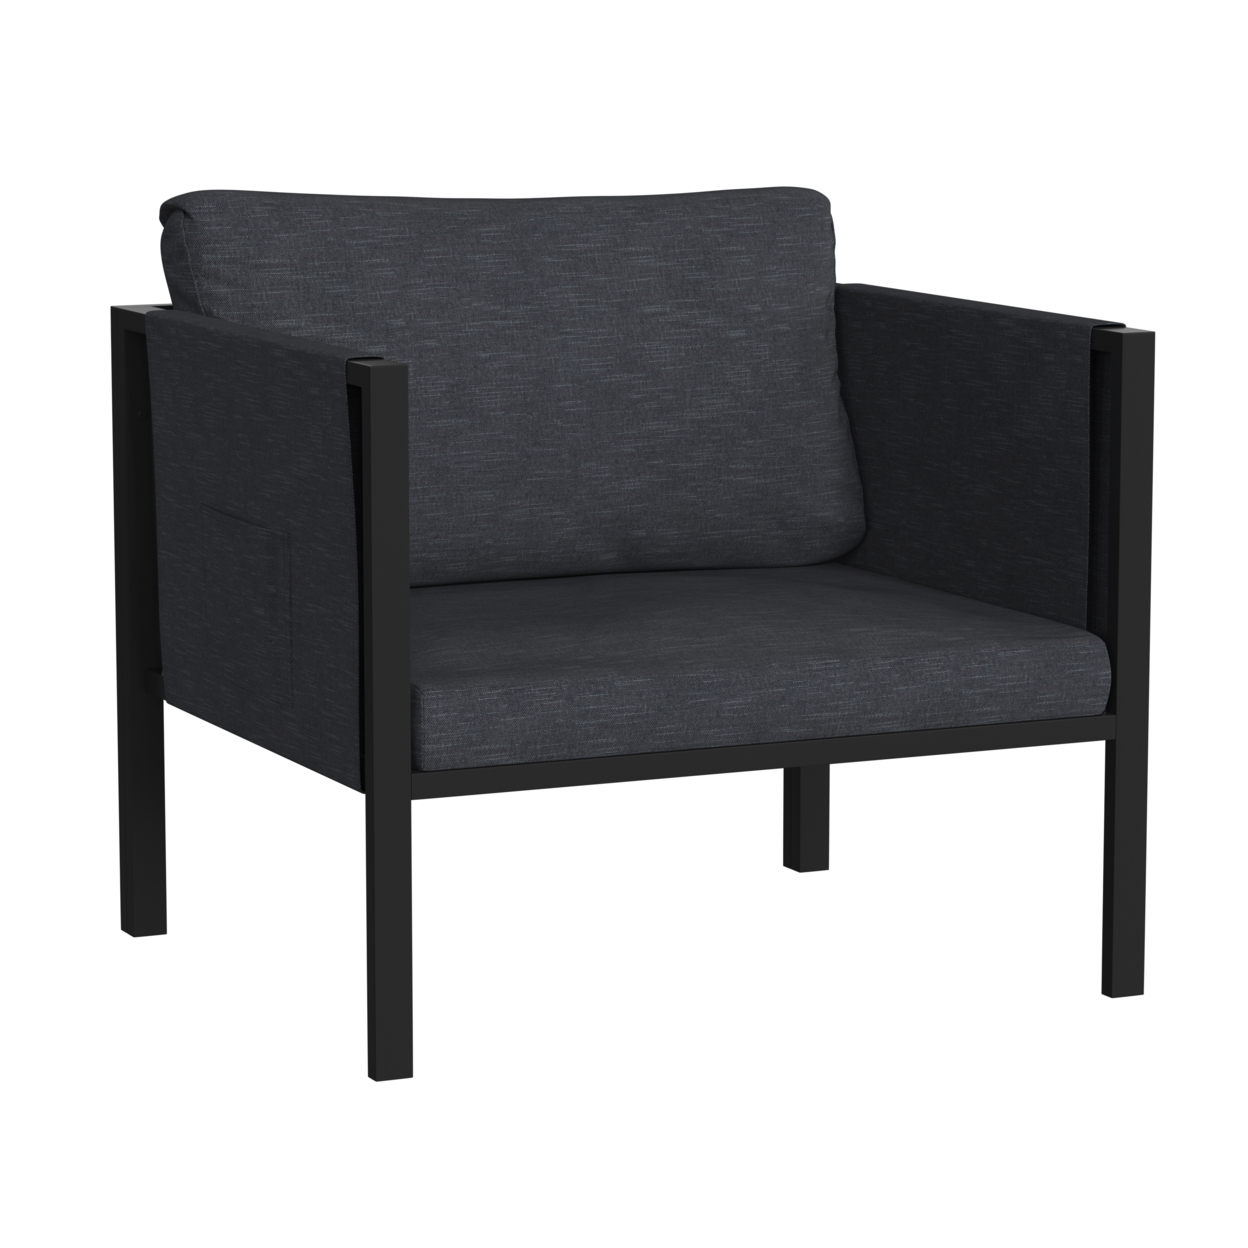 Indooroutdoor Patio Chair With Cushions Modern Steel Framed Chair With Storage Pockets, Black With Charcoal Cushions